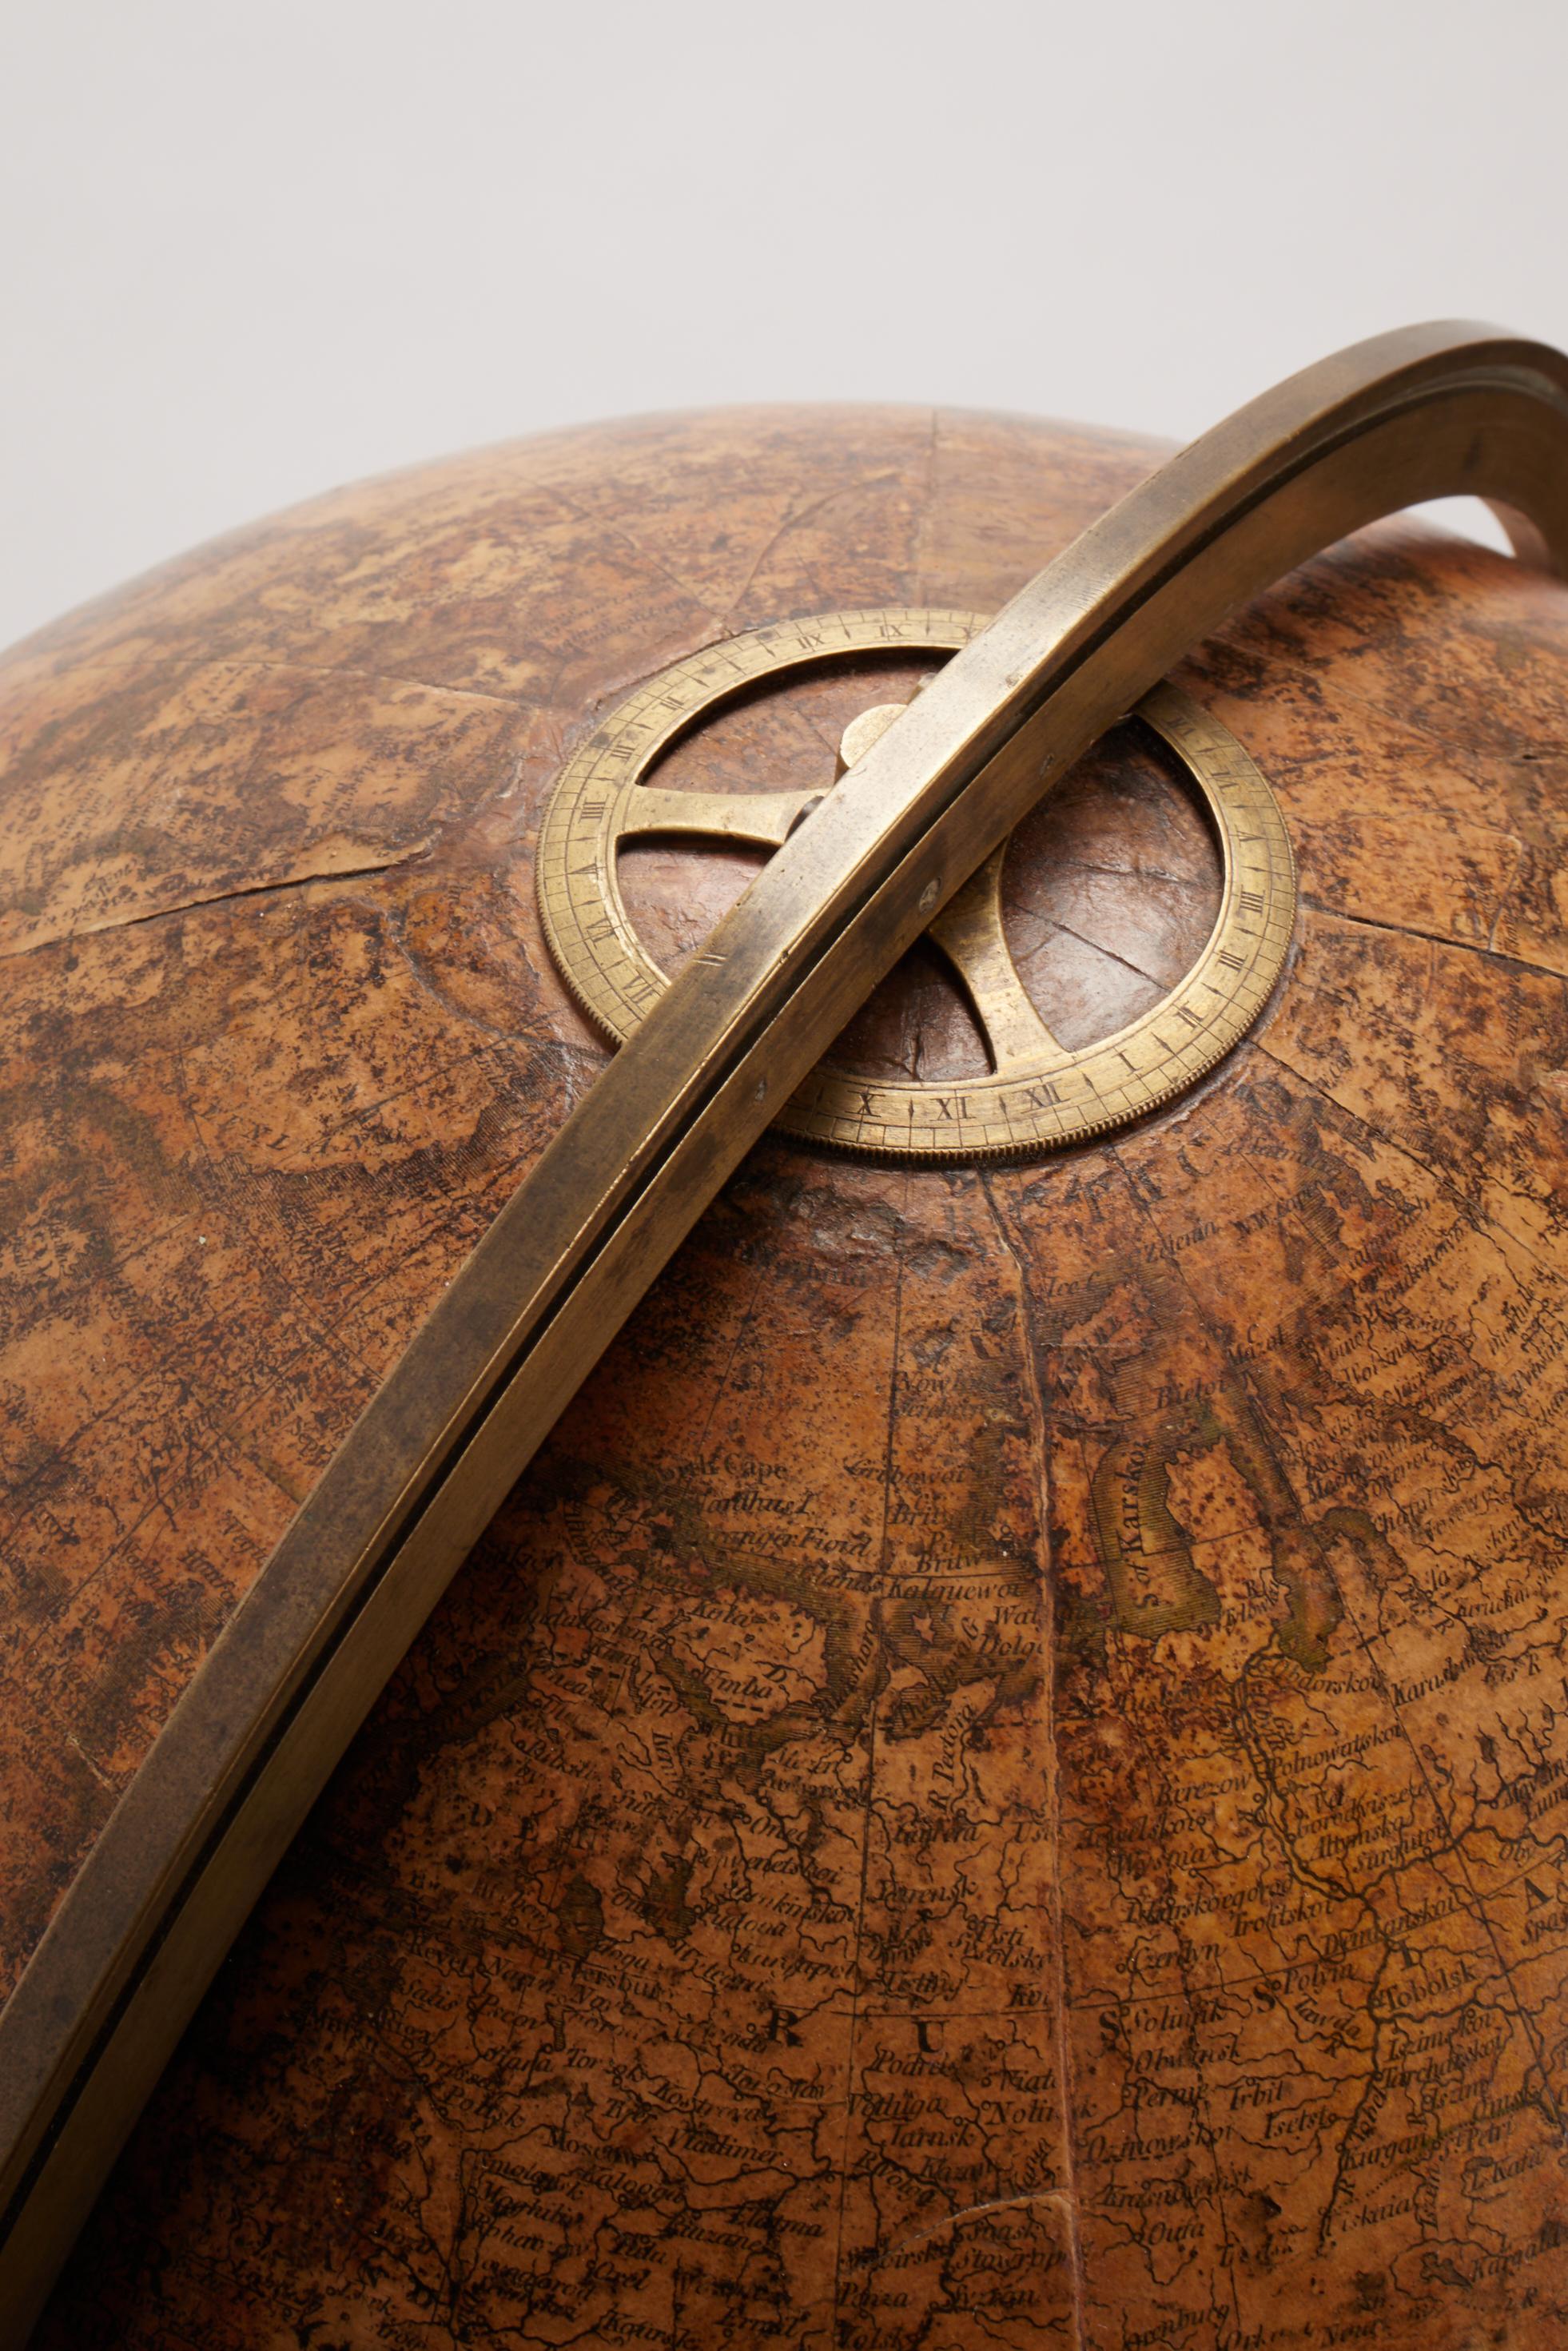 Late 18th Century Terrestrial Globe Signed Cary, London, 1798